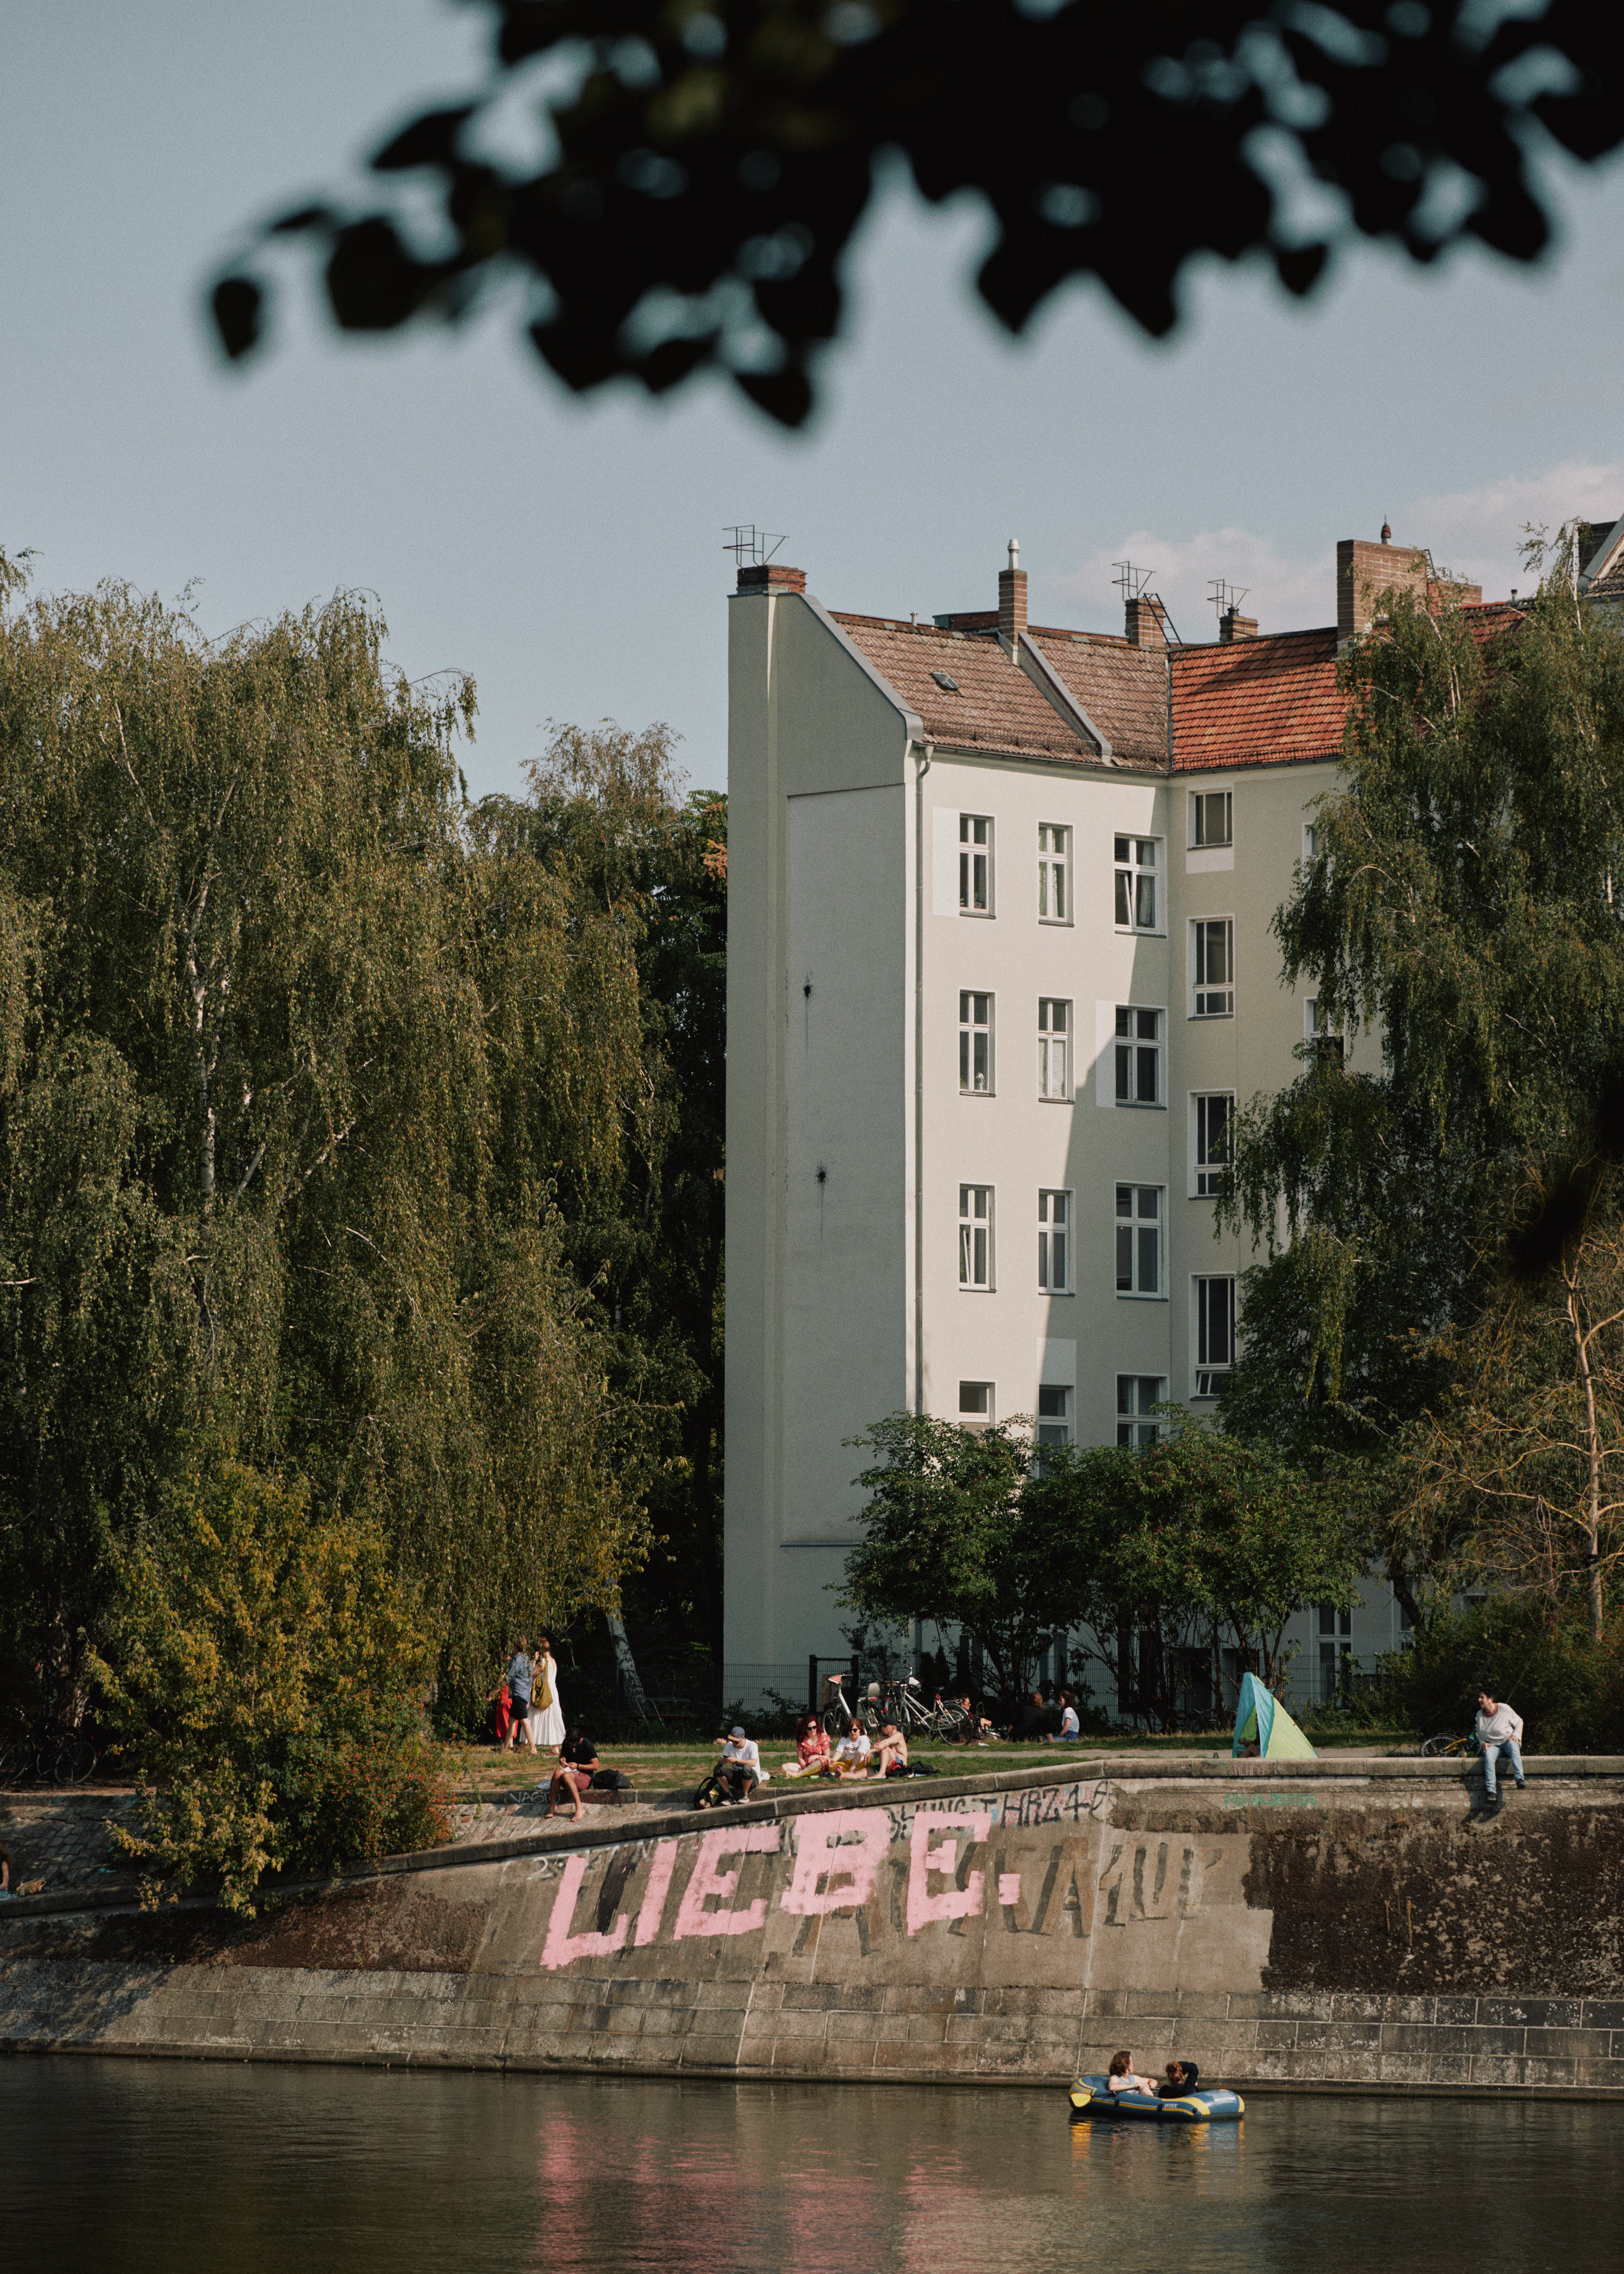 Graffiti on the side of the river Spree in Berlin: "LIEBE"